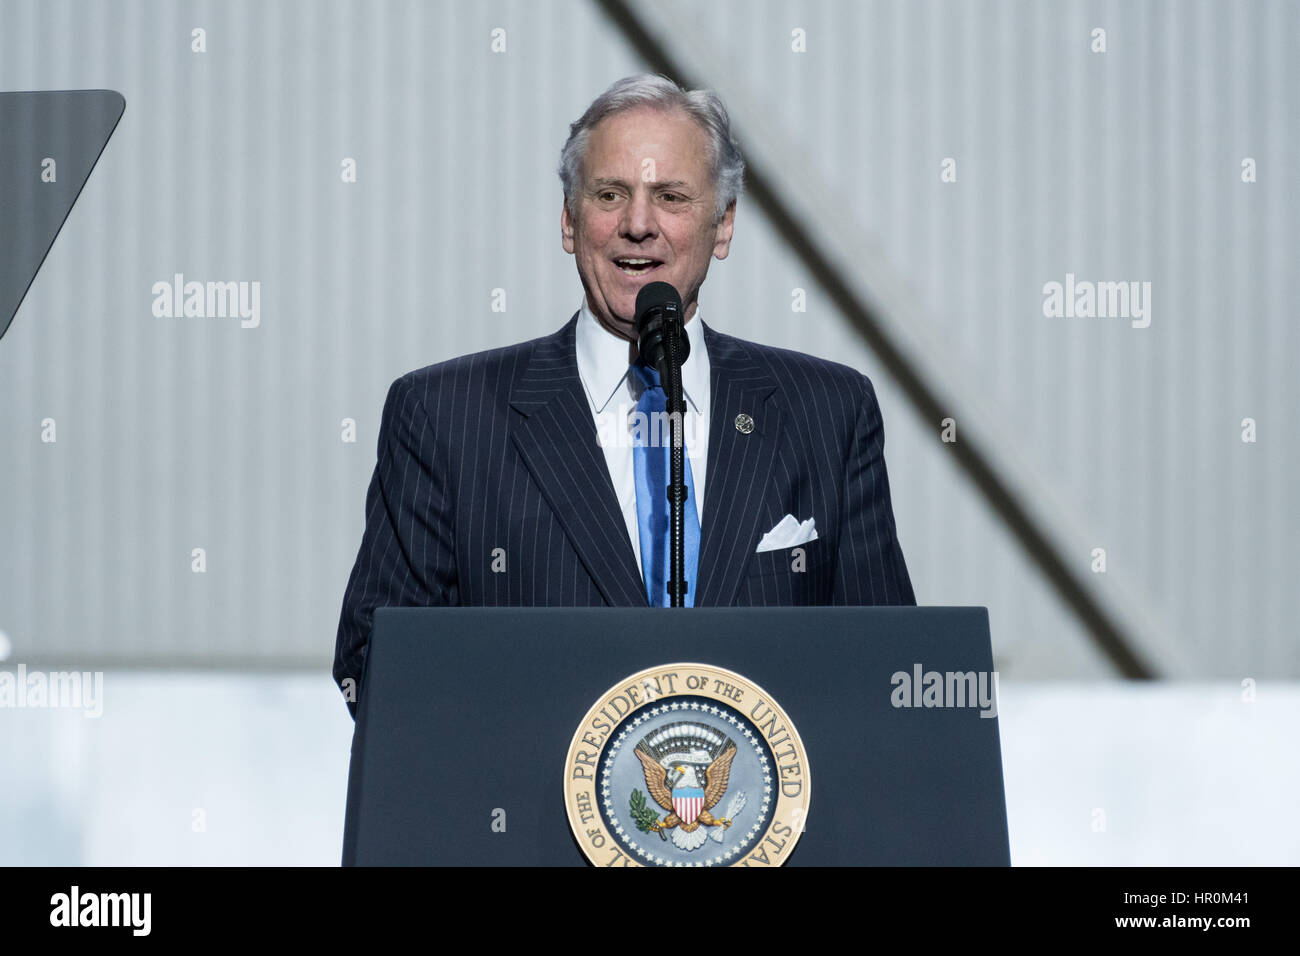 South Carolina Governor Henry McMaster addresses Boeing employees before U.S. President Donald Trump during the debut of the new Boeing 787-10 Dreamliner aircraft at the Boeing factory February 17, 2016 in North Charleston, SC. Trumps visit comes two days after workers at the South Carolina plant voted to reject union representation in a state where Trump won handily. Stock Photo